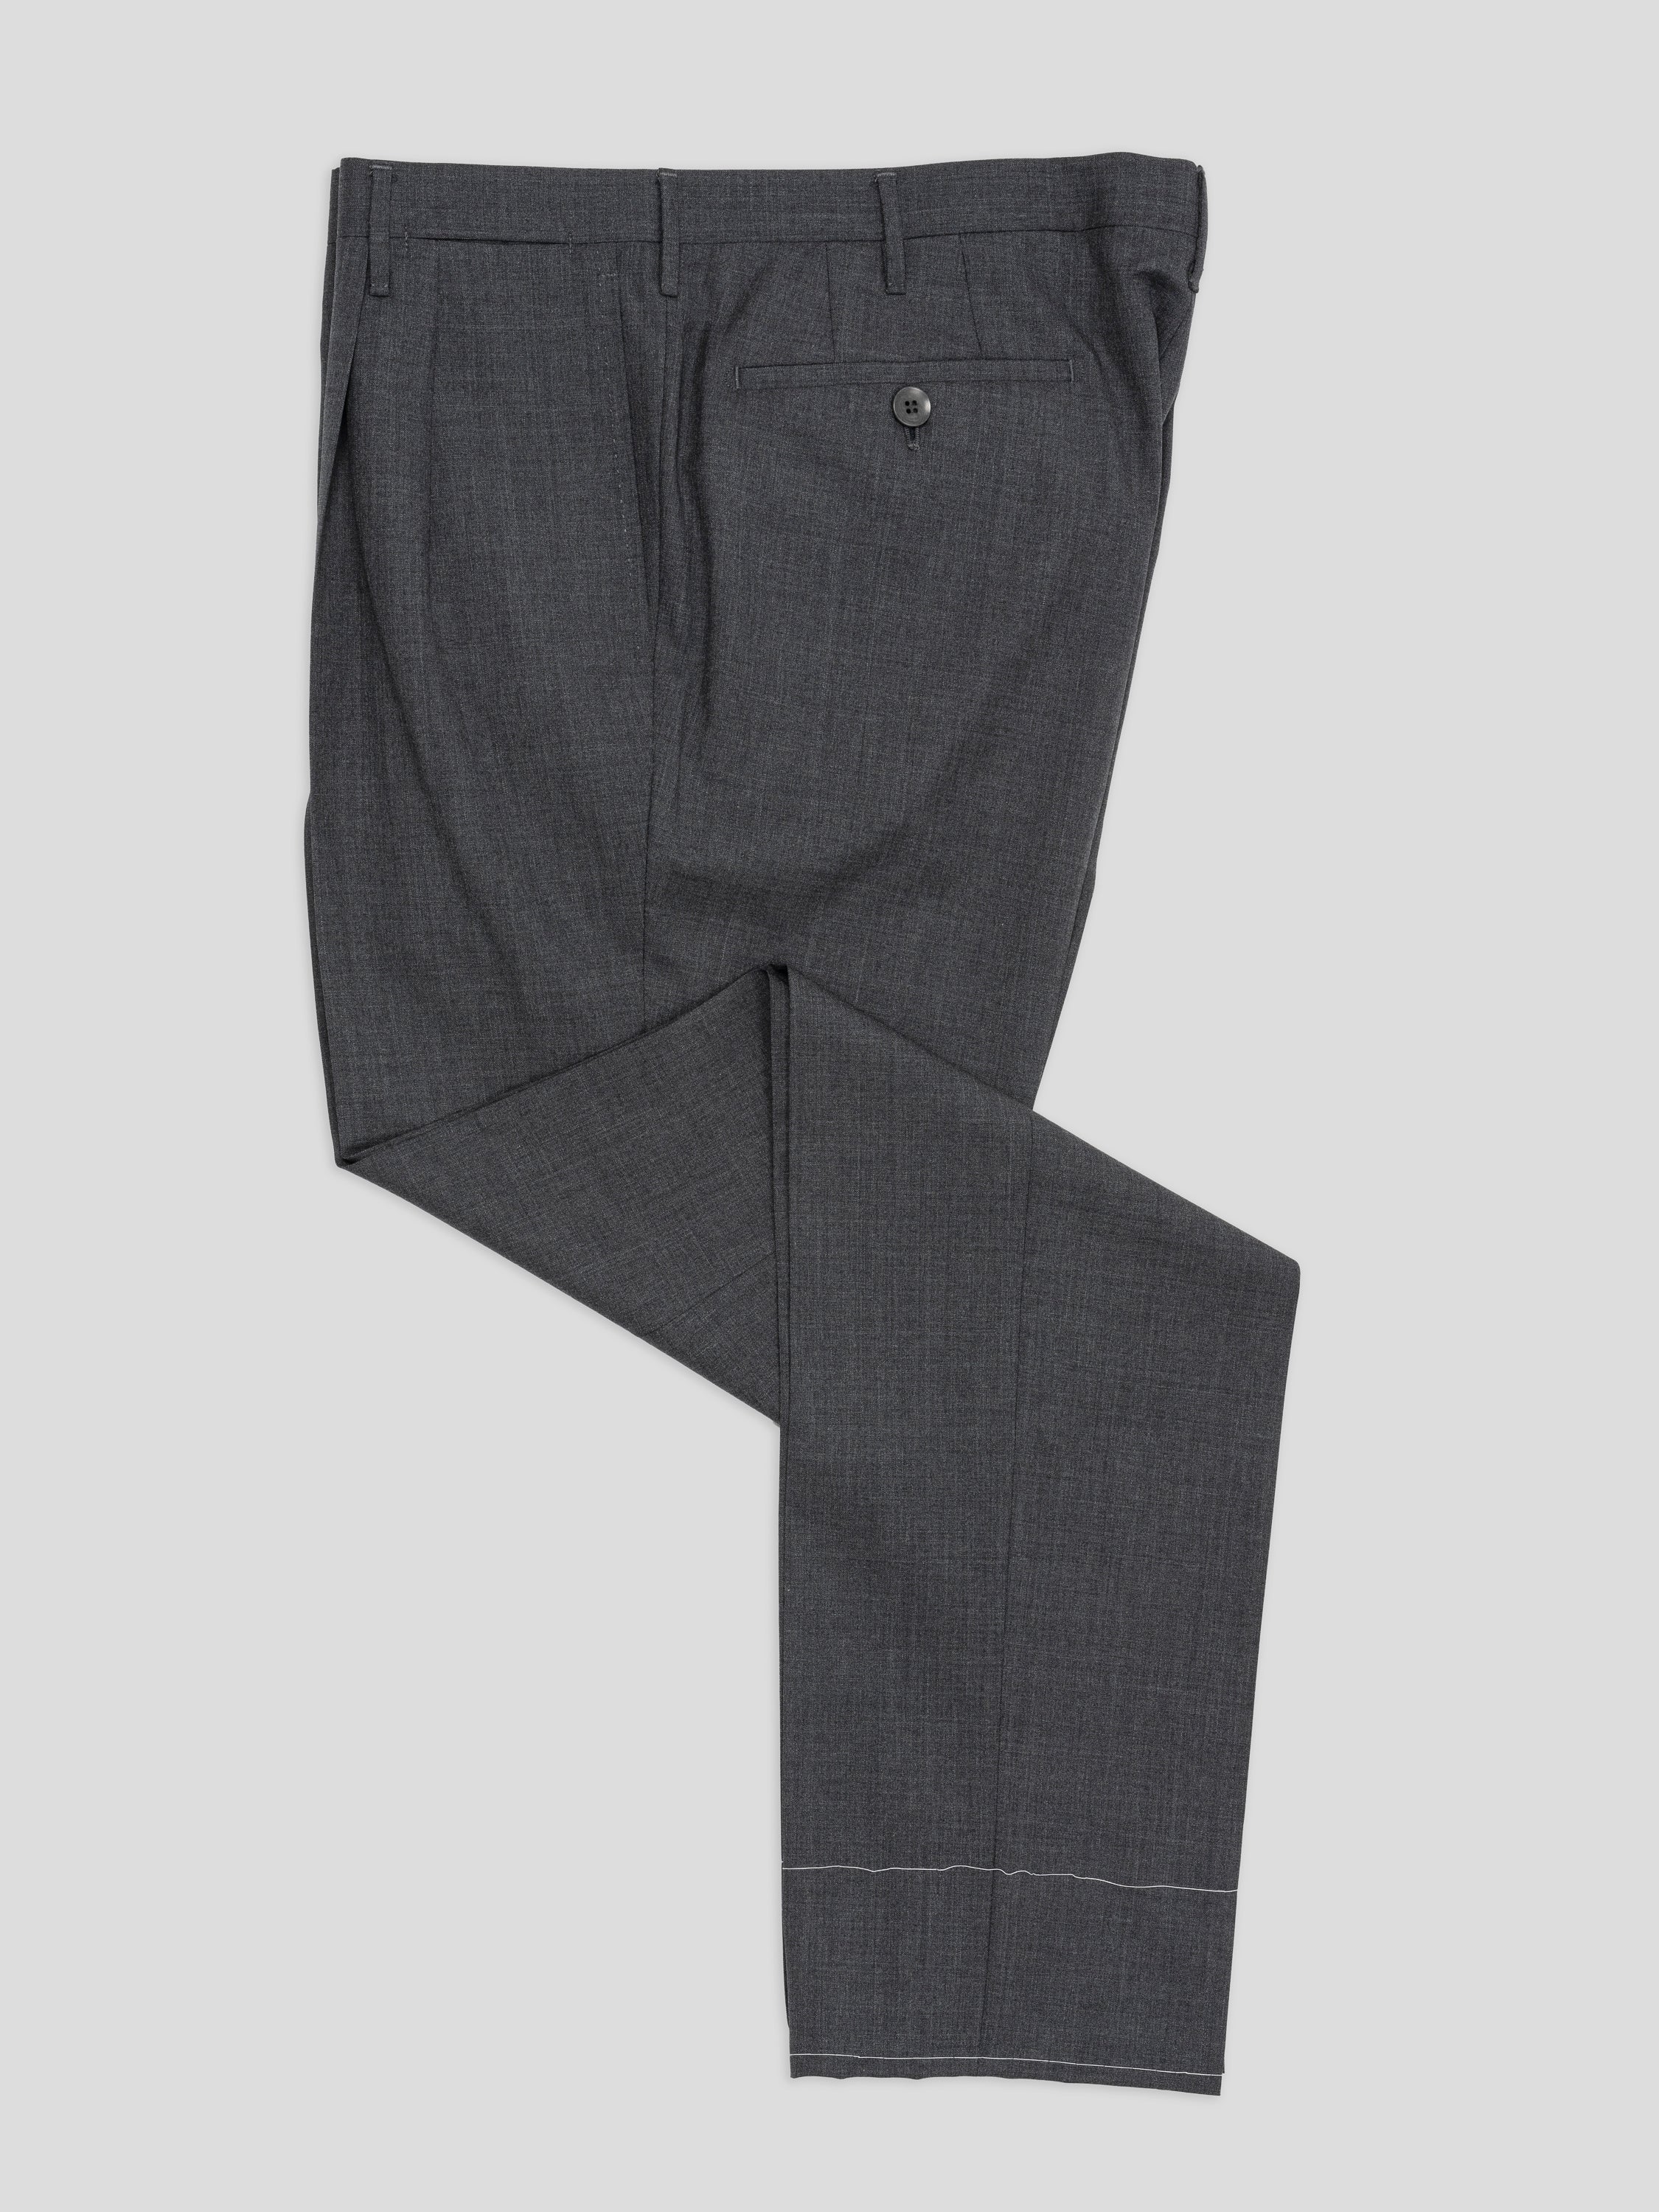 Grey Flannel Trousers Style Guide | Berle